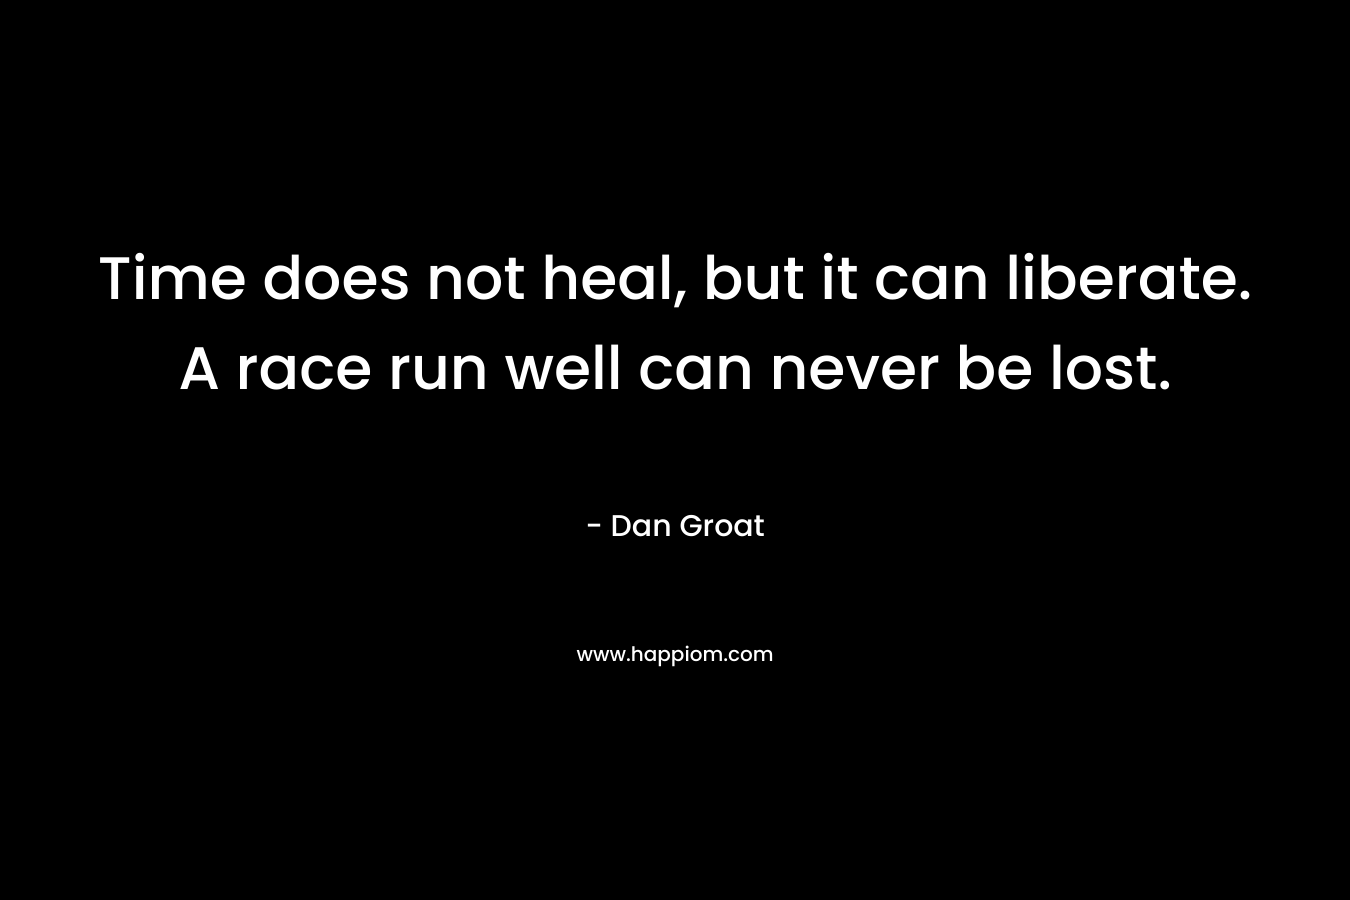 Time does not heal, but it can liberate. A race run well can never be lost. – Dan Groat